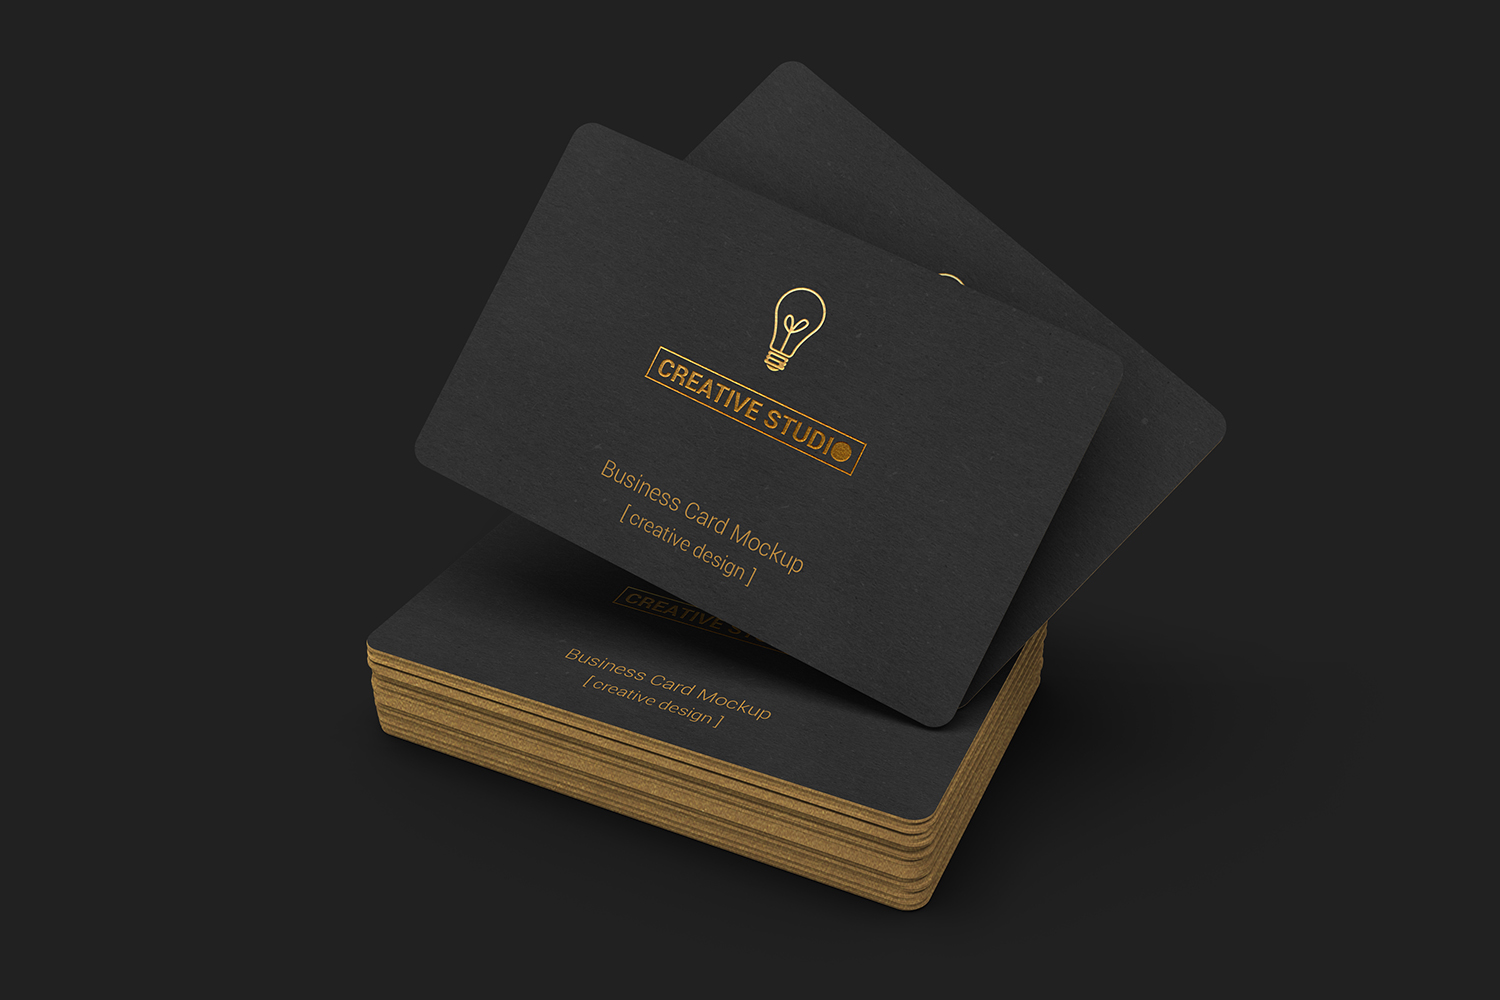 Download 85x55 Black Business Card With Rounded Corners Mockups (138019) | Products | Design Bundles